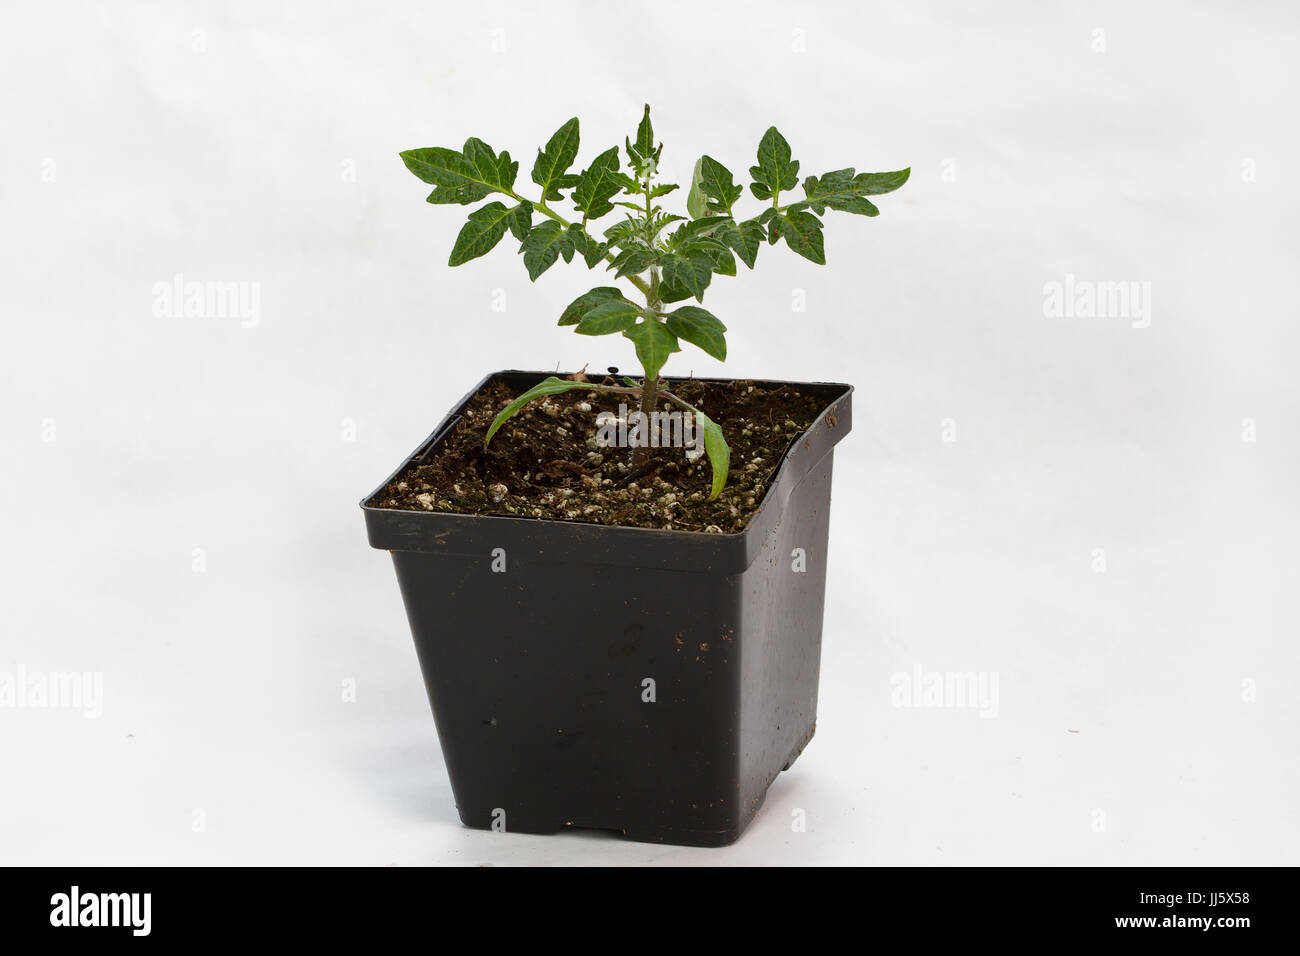 Vegetable seedlings in a nursery pot on white isolated background. Stock Photo